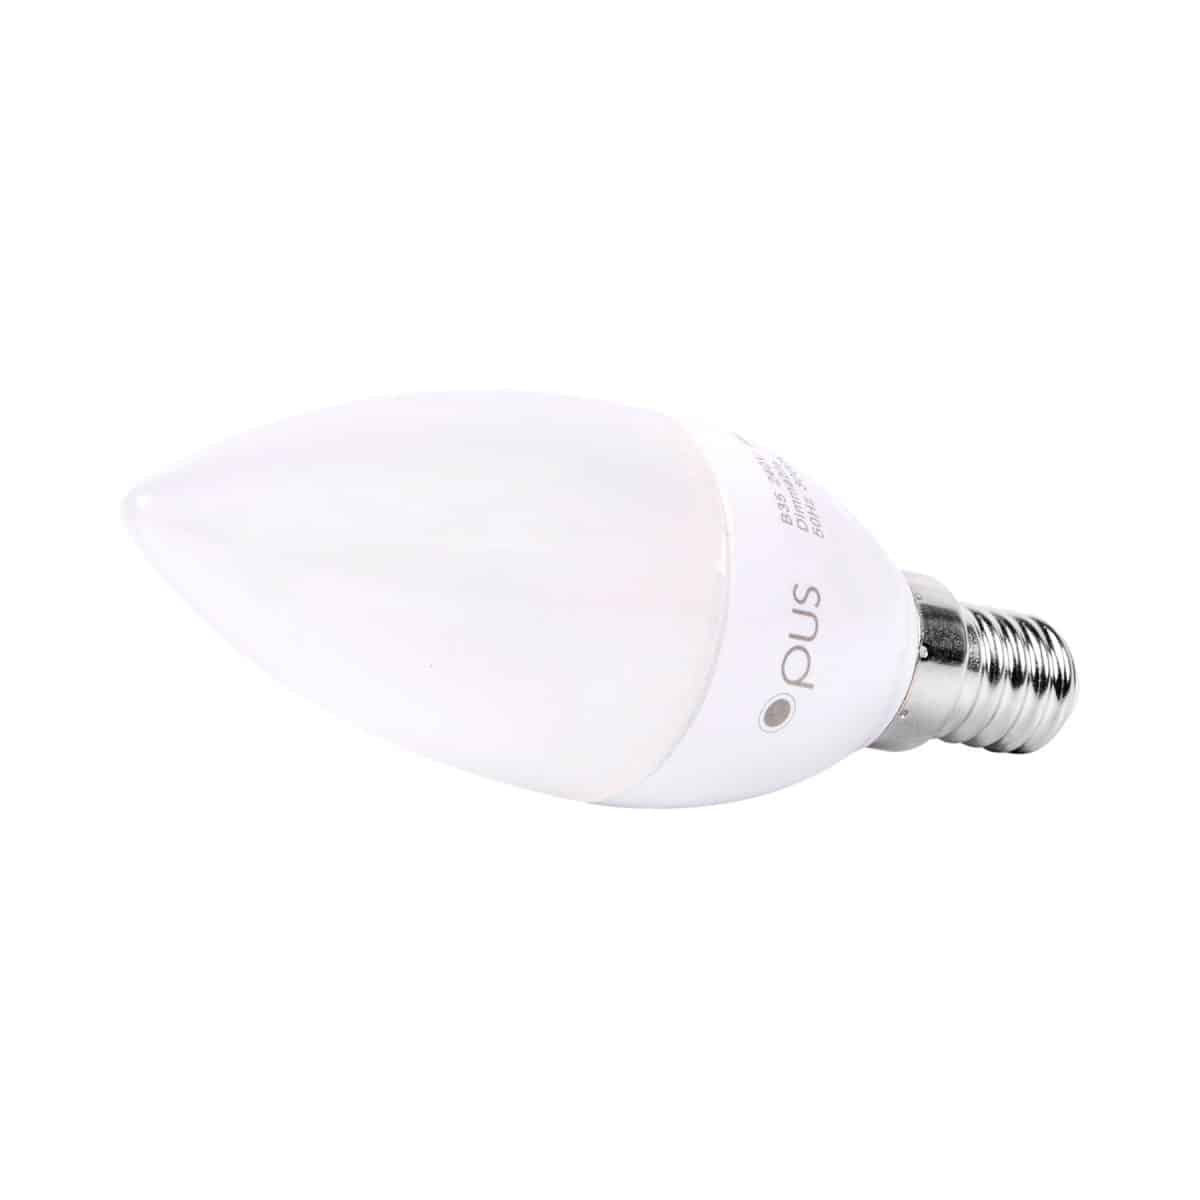 5watt Candle LED SES E14 Small Screw Cap Warm White Equivalent To 40watt Dimmable